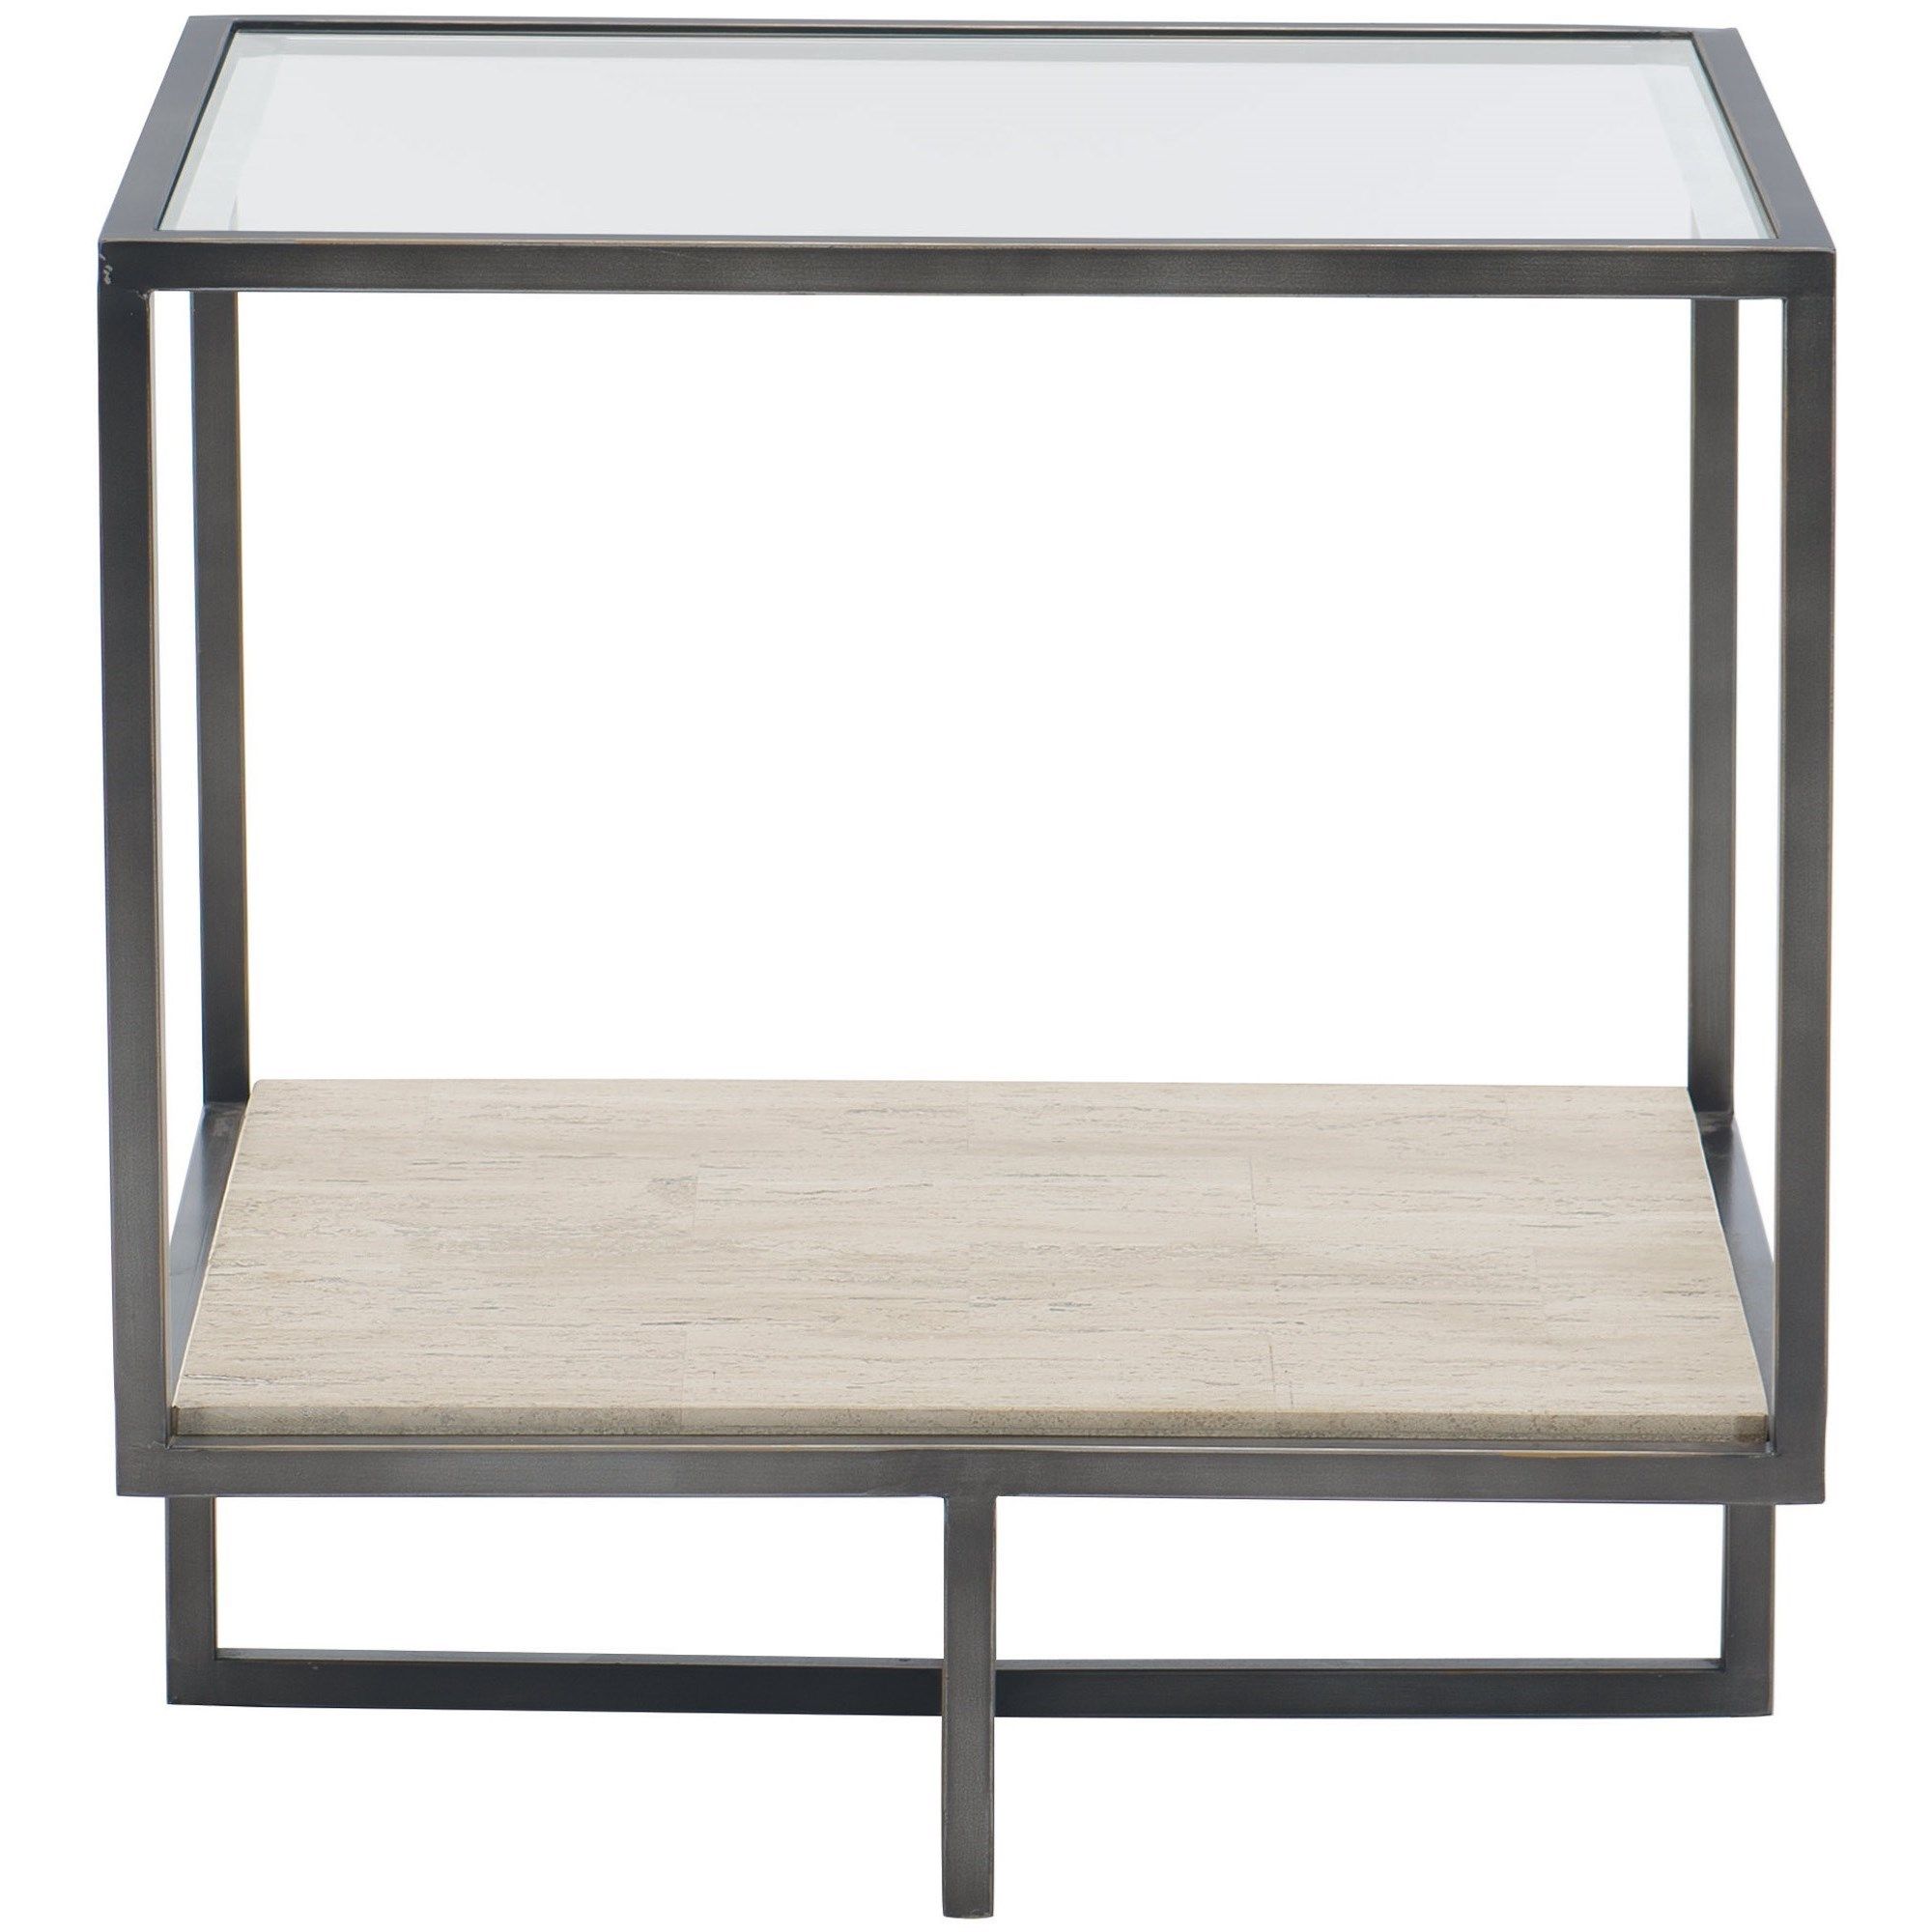 Bernhardt Harlow 514 121 Contemporary Metal Square End Table | Baer's In Square Console Tables (View 19 of 20)